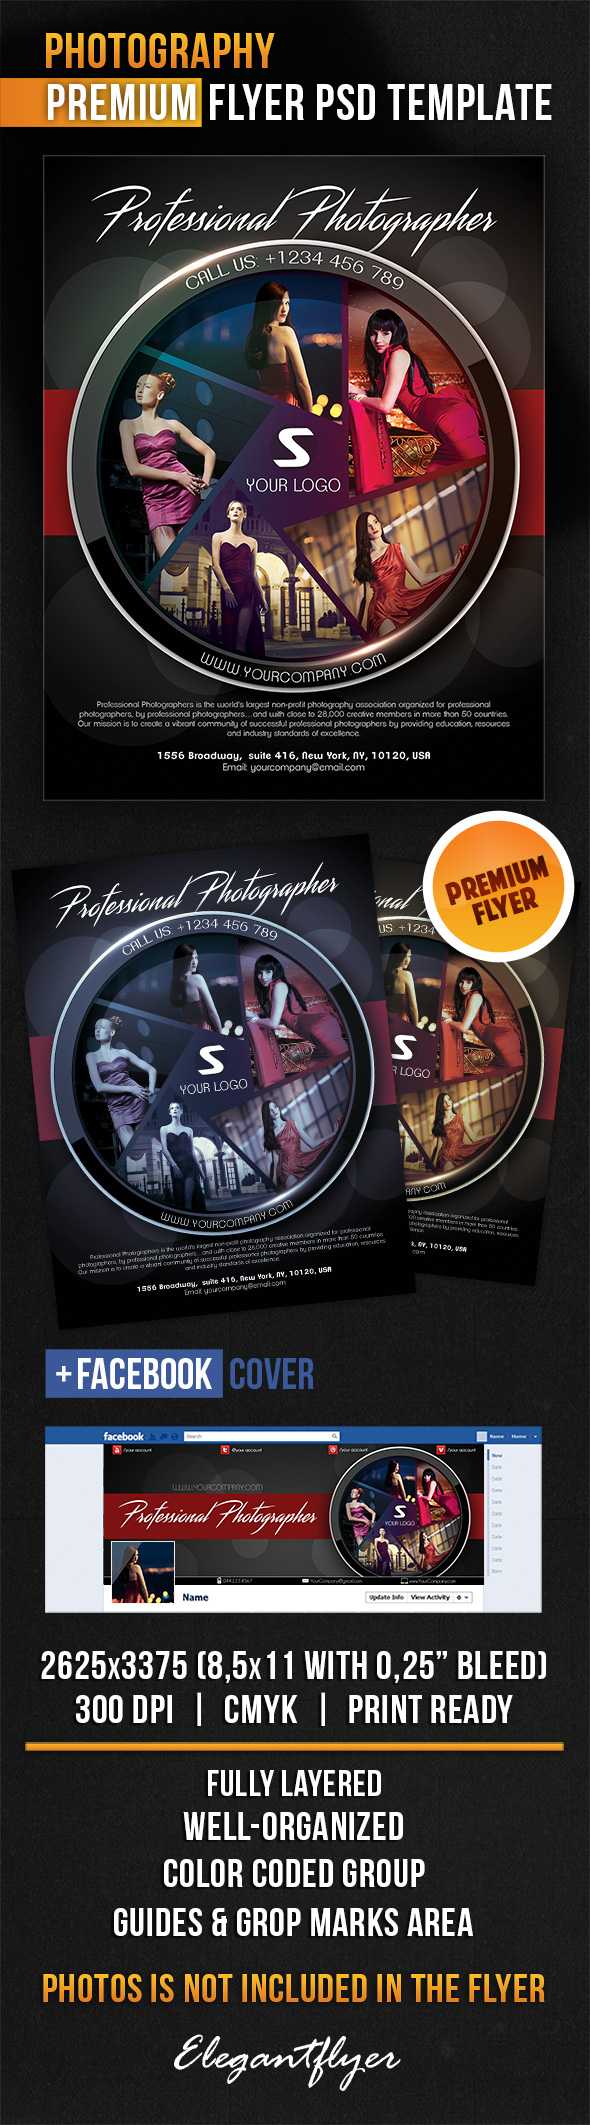 15 Photography Flyer Free Psd Images – Photography Flyers With Free Photography Flyer Templates Psd